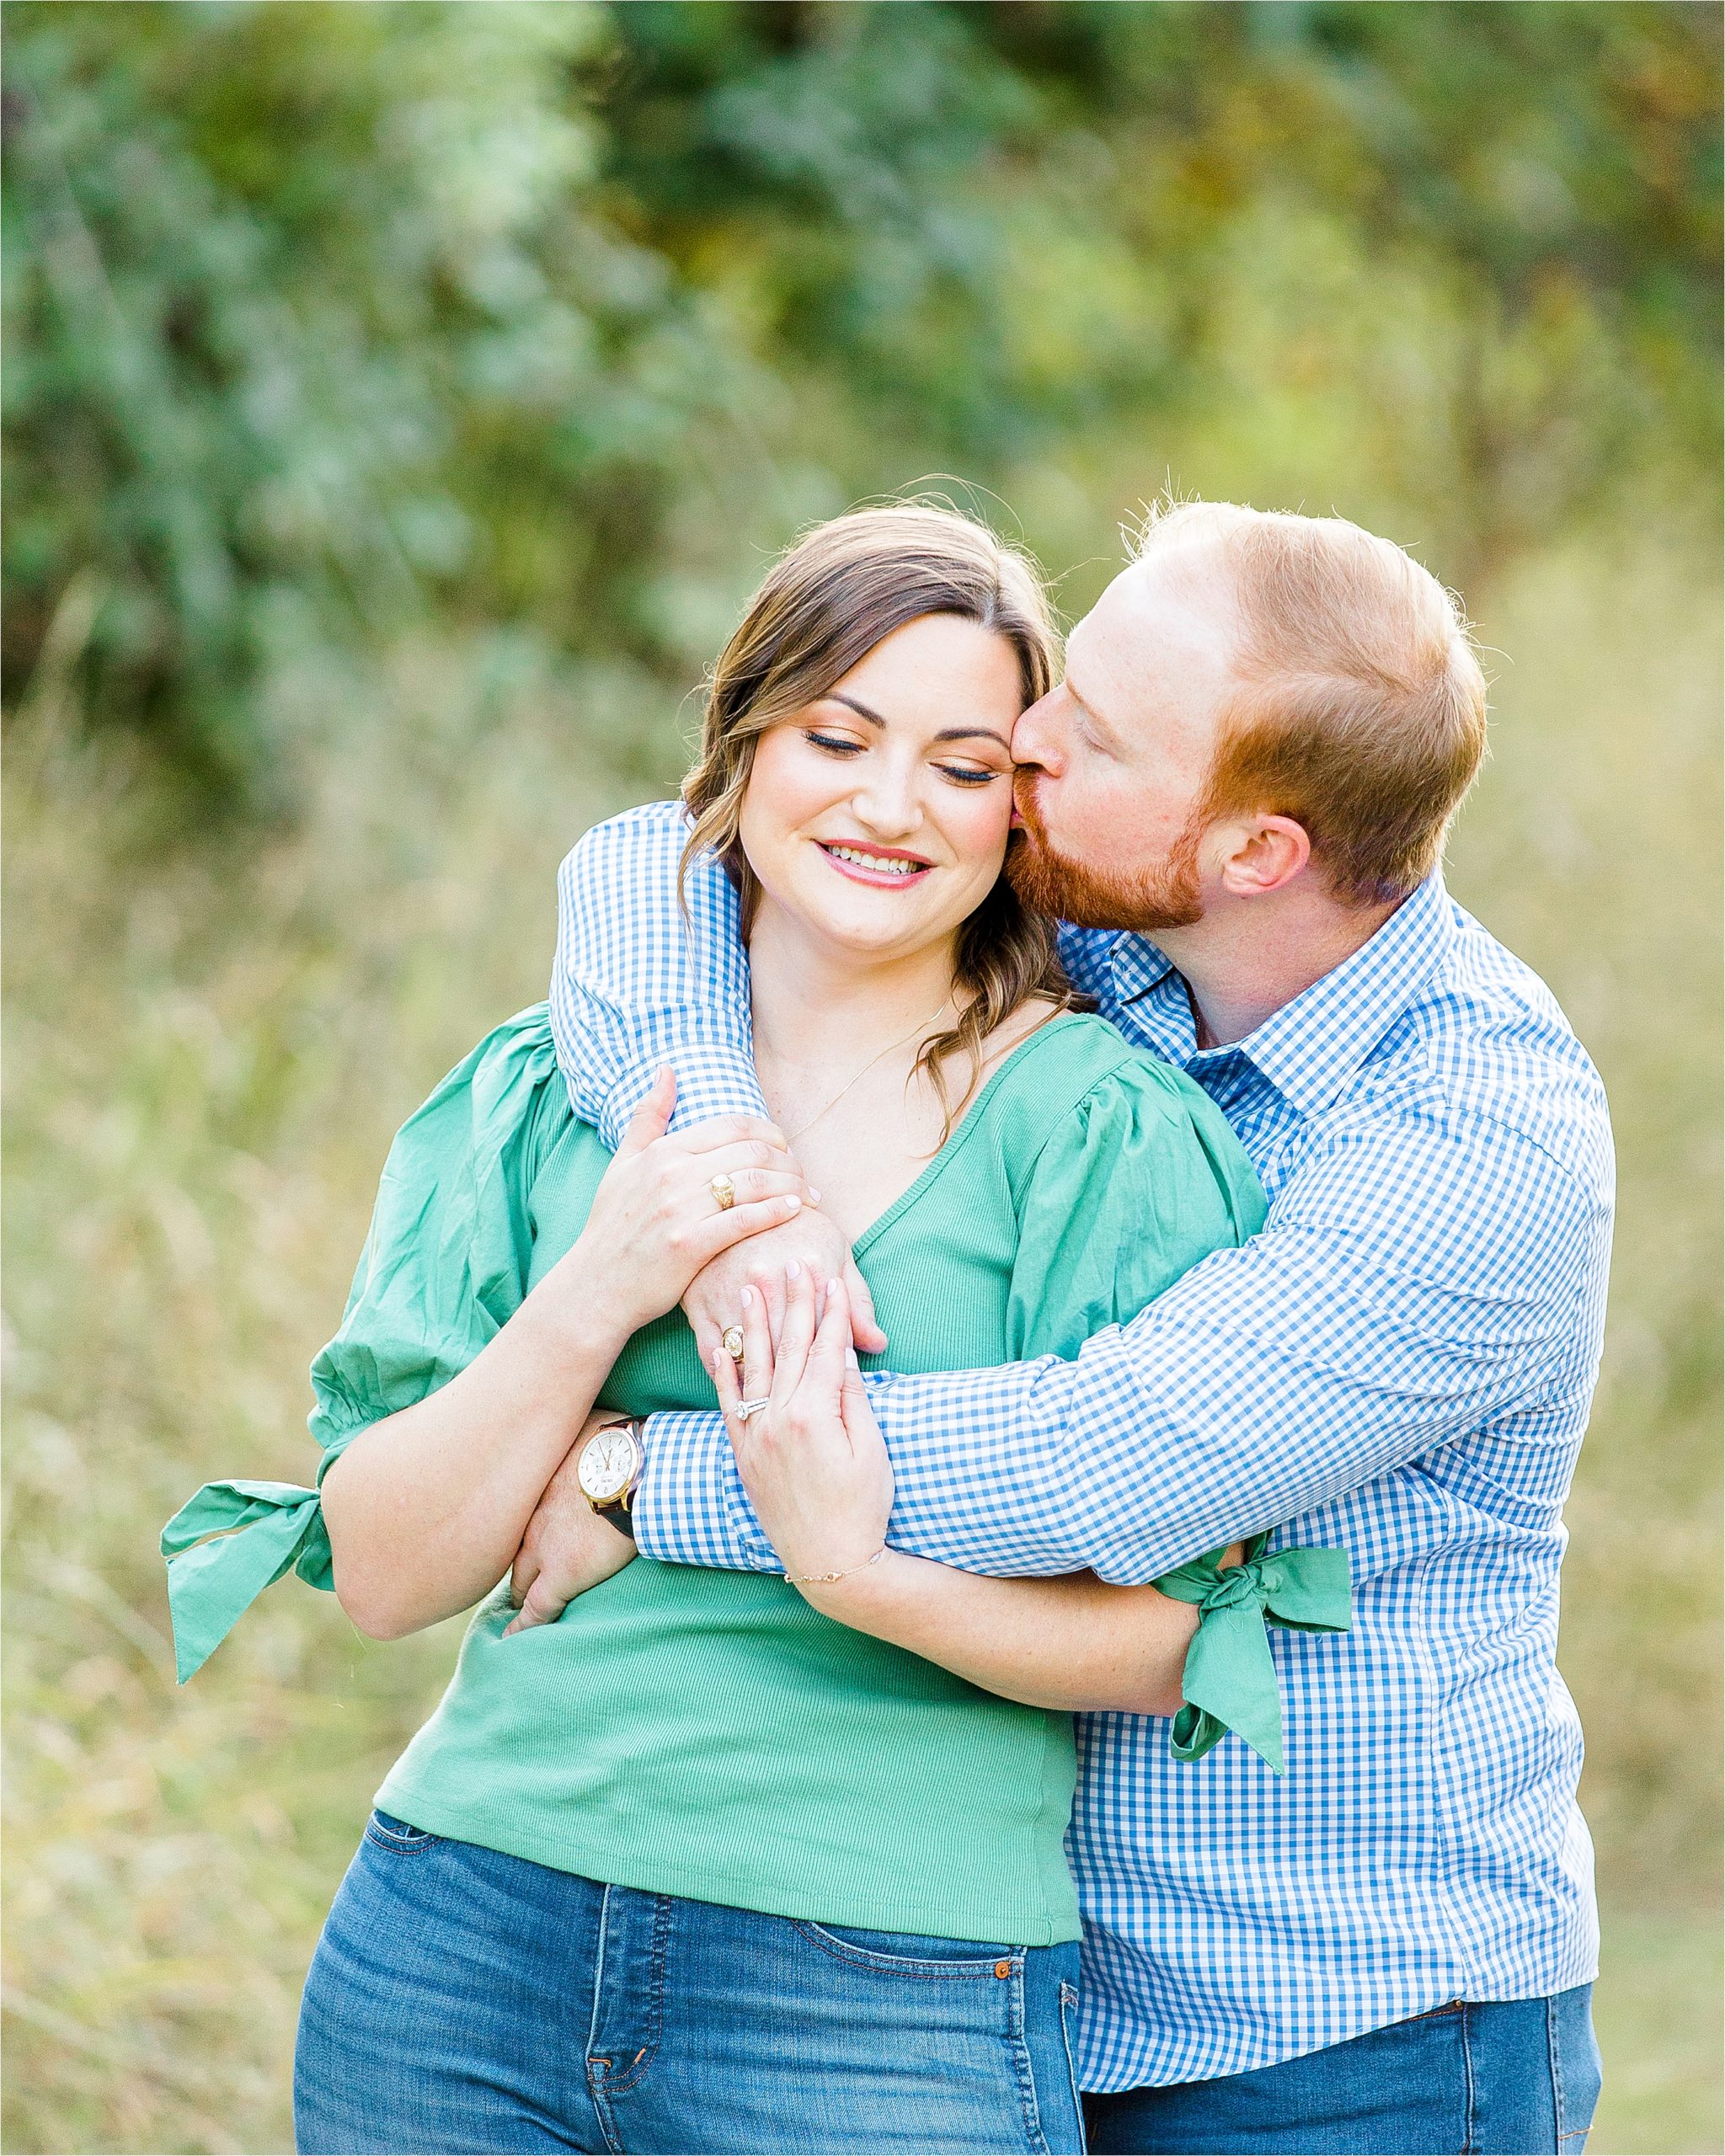 A groom to be hugs over his fiance's shoulder and gives her a big kiss on the cheek as she smiles during their outdoor engagement session at Cibolo Creek Nature Center. 